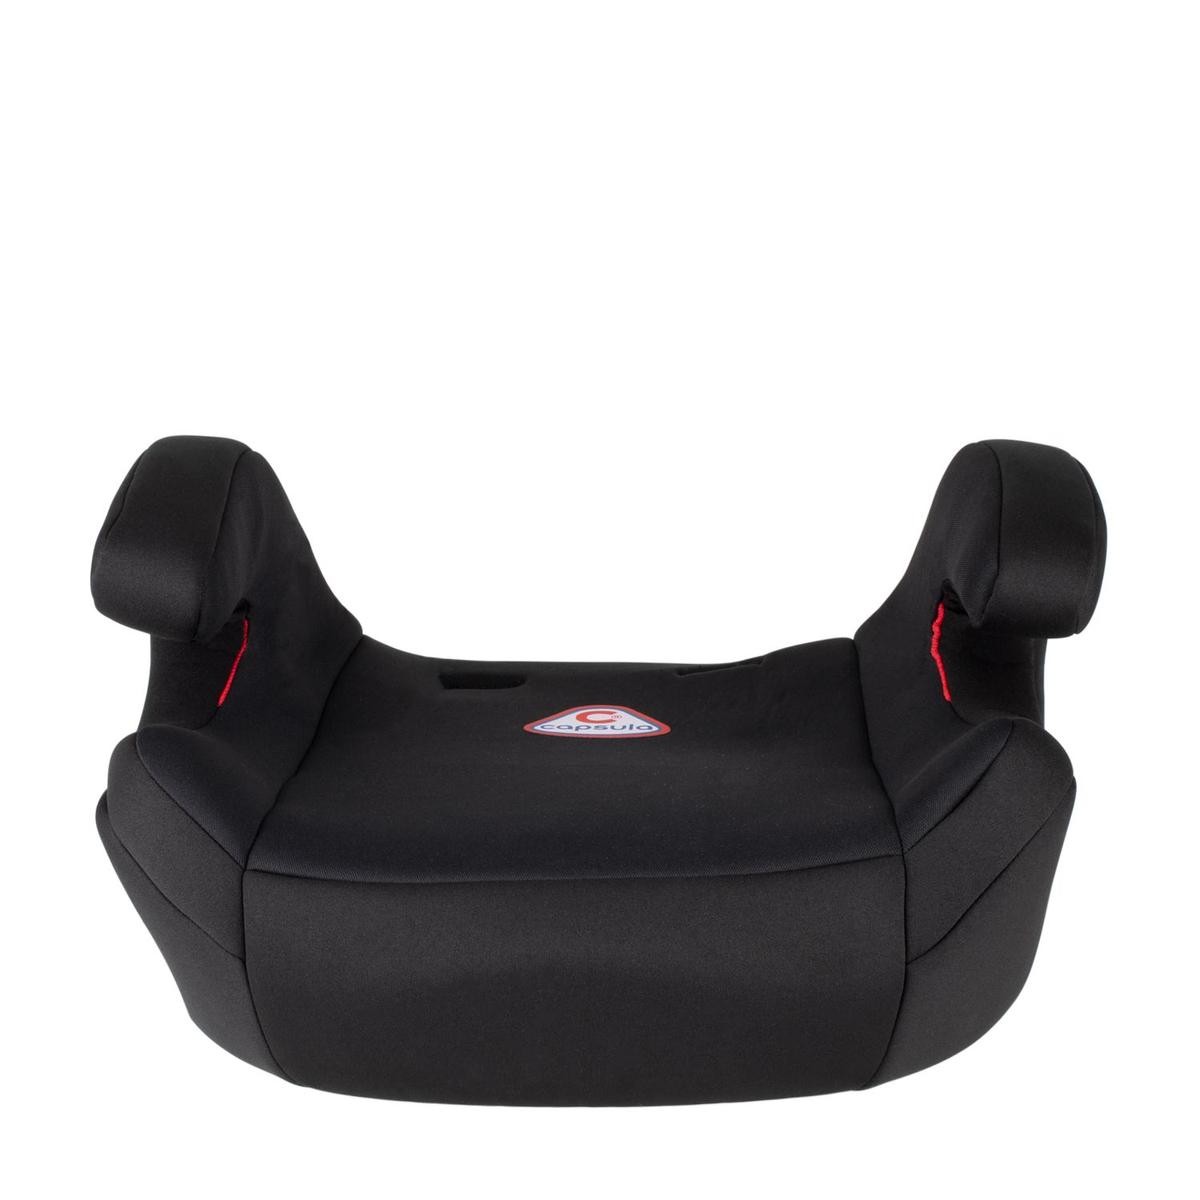 Zinloos Vakman oppervlakte Booster seat capsula JR5 without Isofix, 15-36kg, Group 2, 3, Black 773010  ▷ AUTODOC price and review